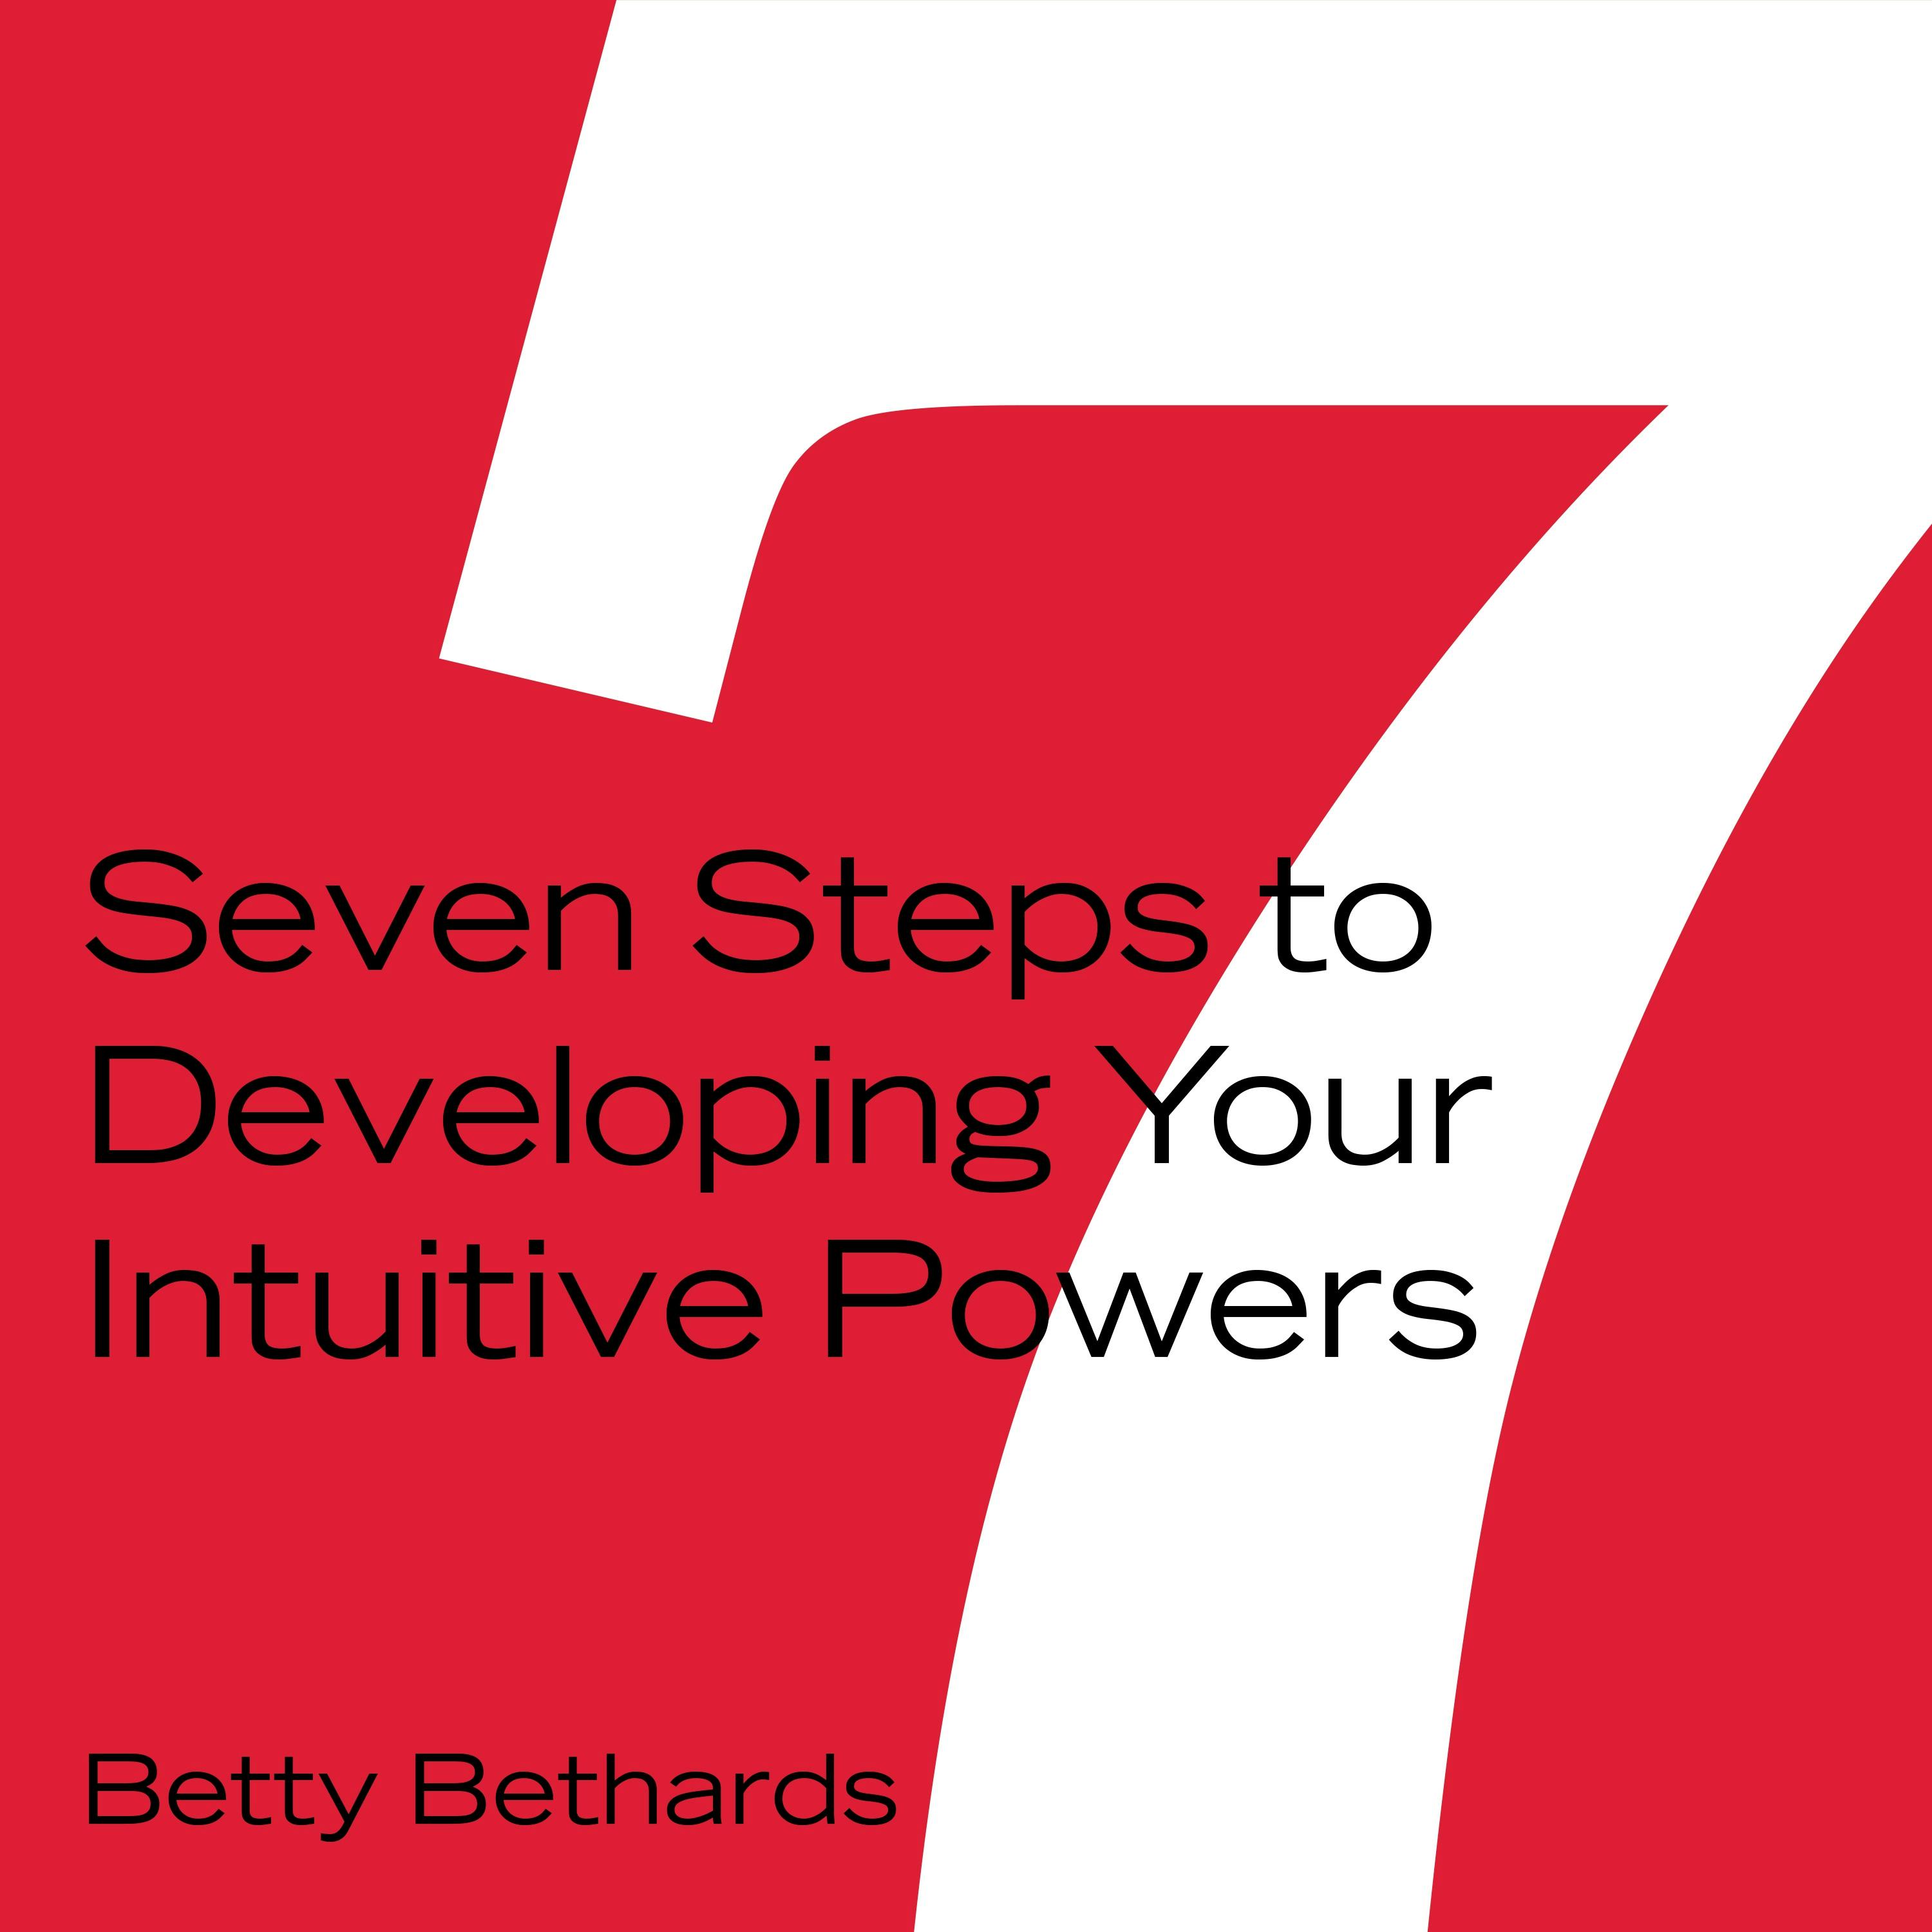 Seven Steps to Developing Your Intuitive Powers - Betty Bethards